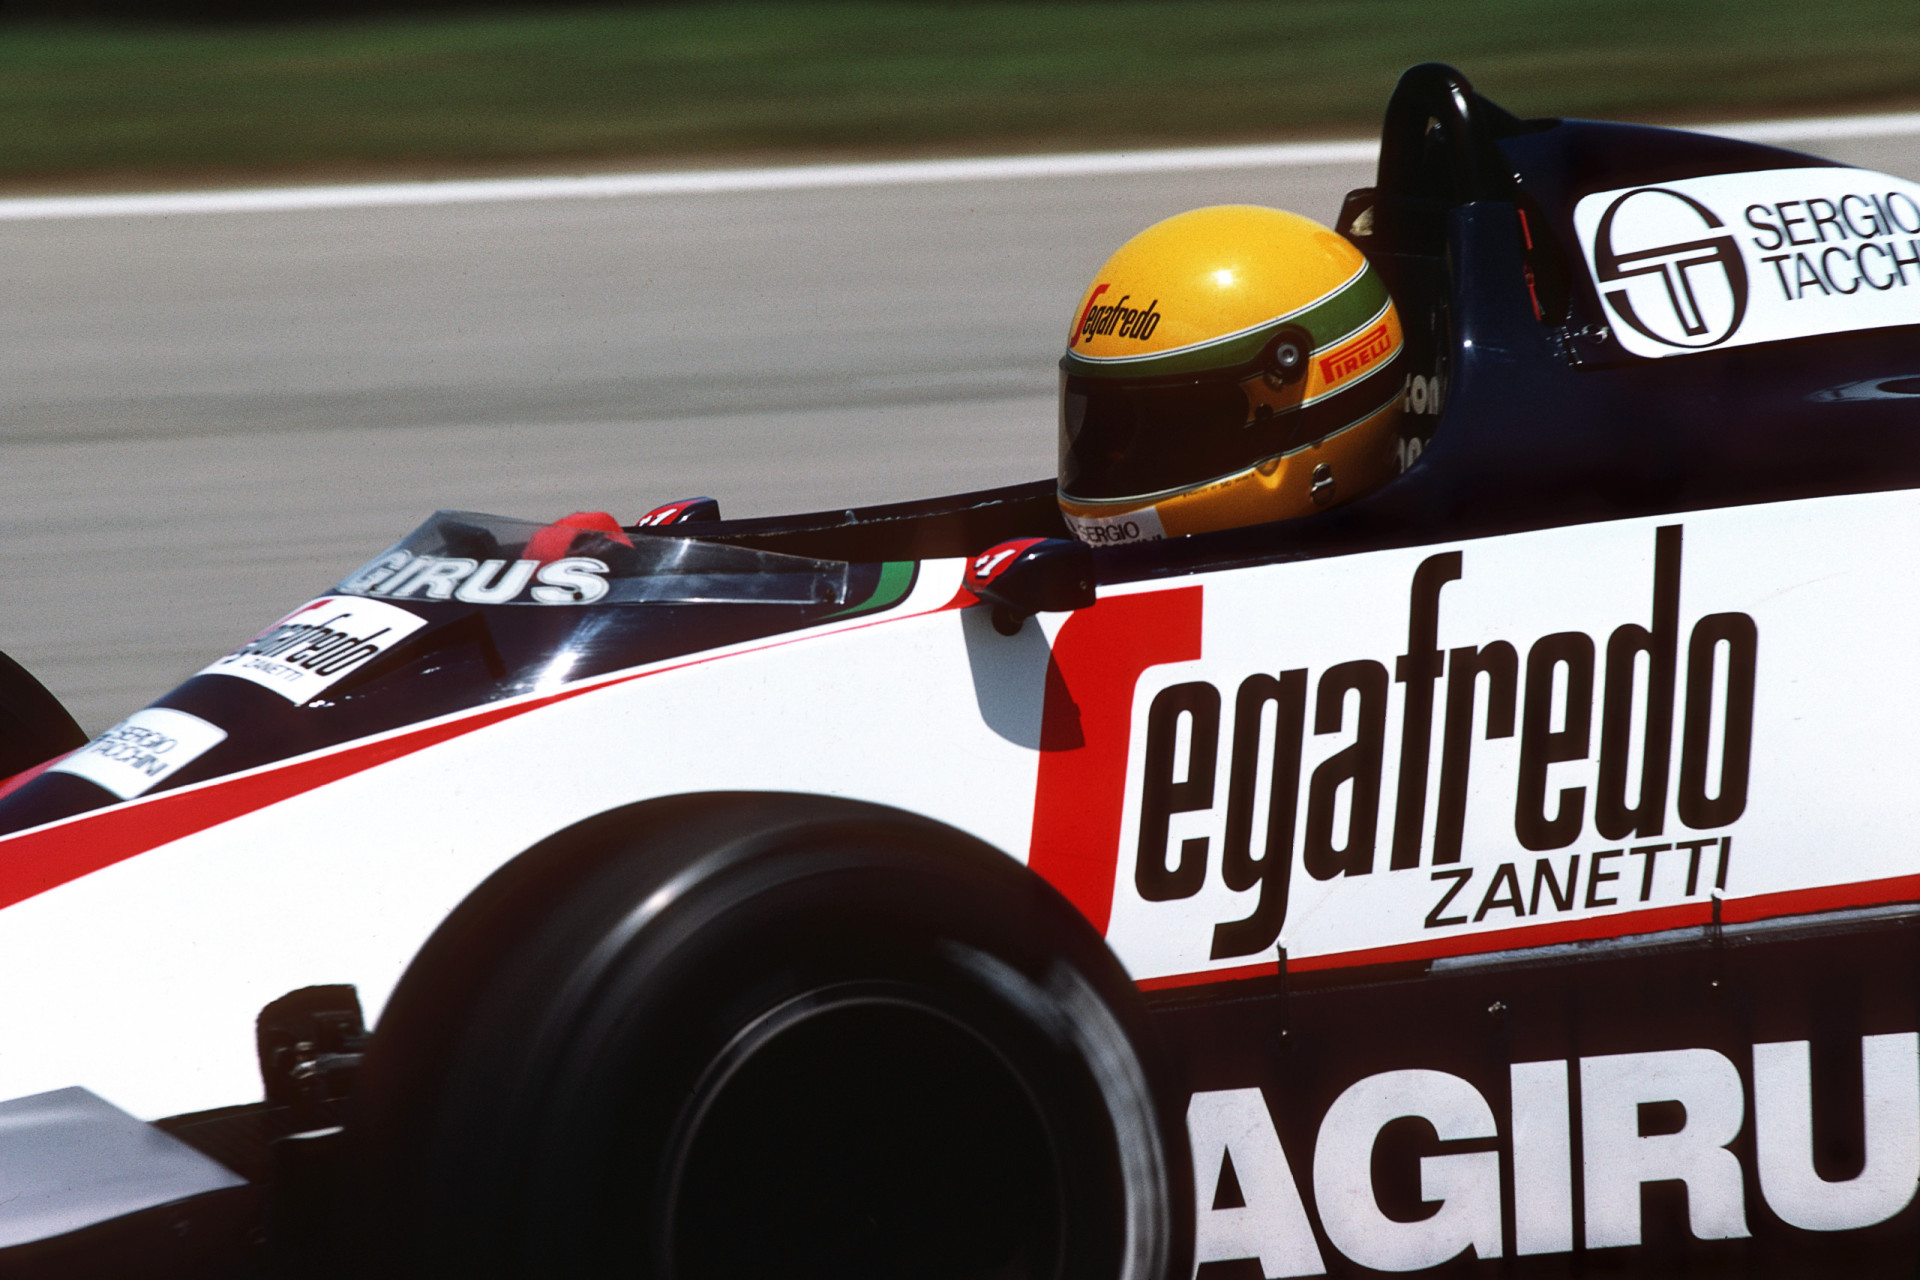 <p>Senna began driving F1 in 1984, for Toleman-Hart. Suitably, he made his F1 debut at the Brazilian Grand Prix in Rio de Janeiro (pictured). The Brazilian's meteoric career in F1 was in gear and ready to accelerate.</p><p><a href="https://www.msn.com/en-us/community/channel/vid-7xx8mnucu55yw63we9va2gwr7uihbxwc68fxqp25x6tg4ftibpra?cvid=94631541bc0f4f89bfd59158d696ad7e">Follow us and access great exclusive content every day</a></p>